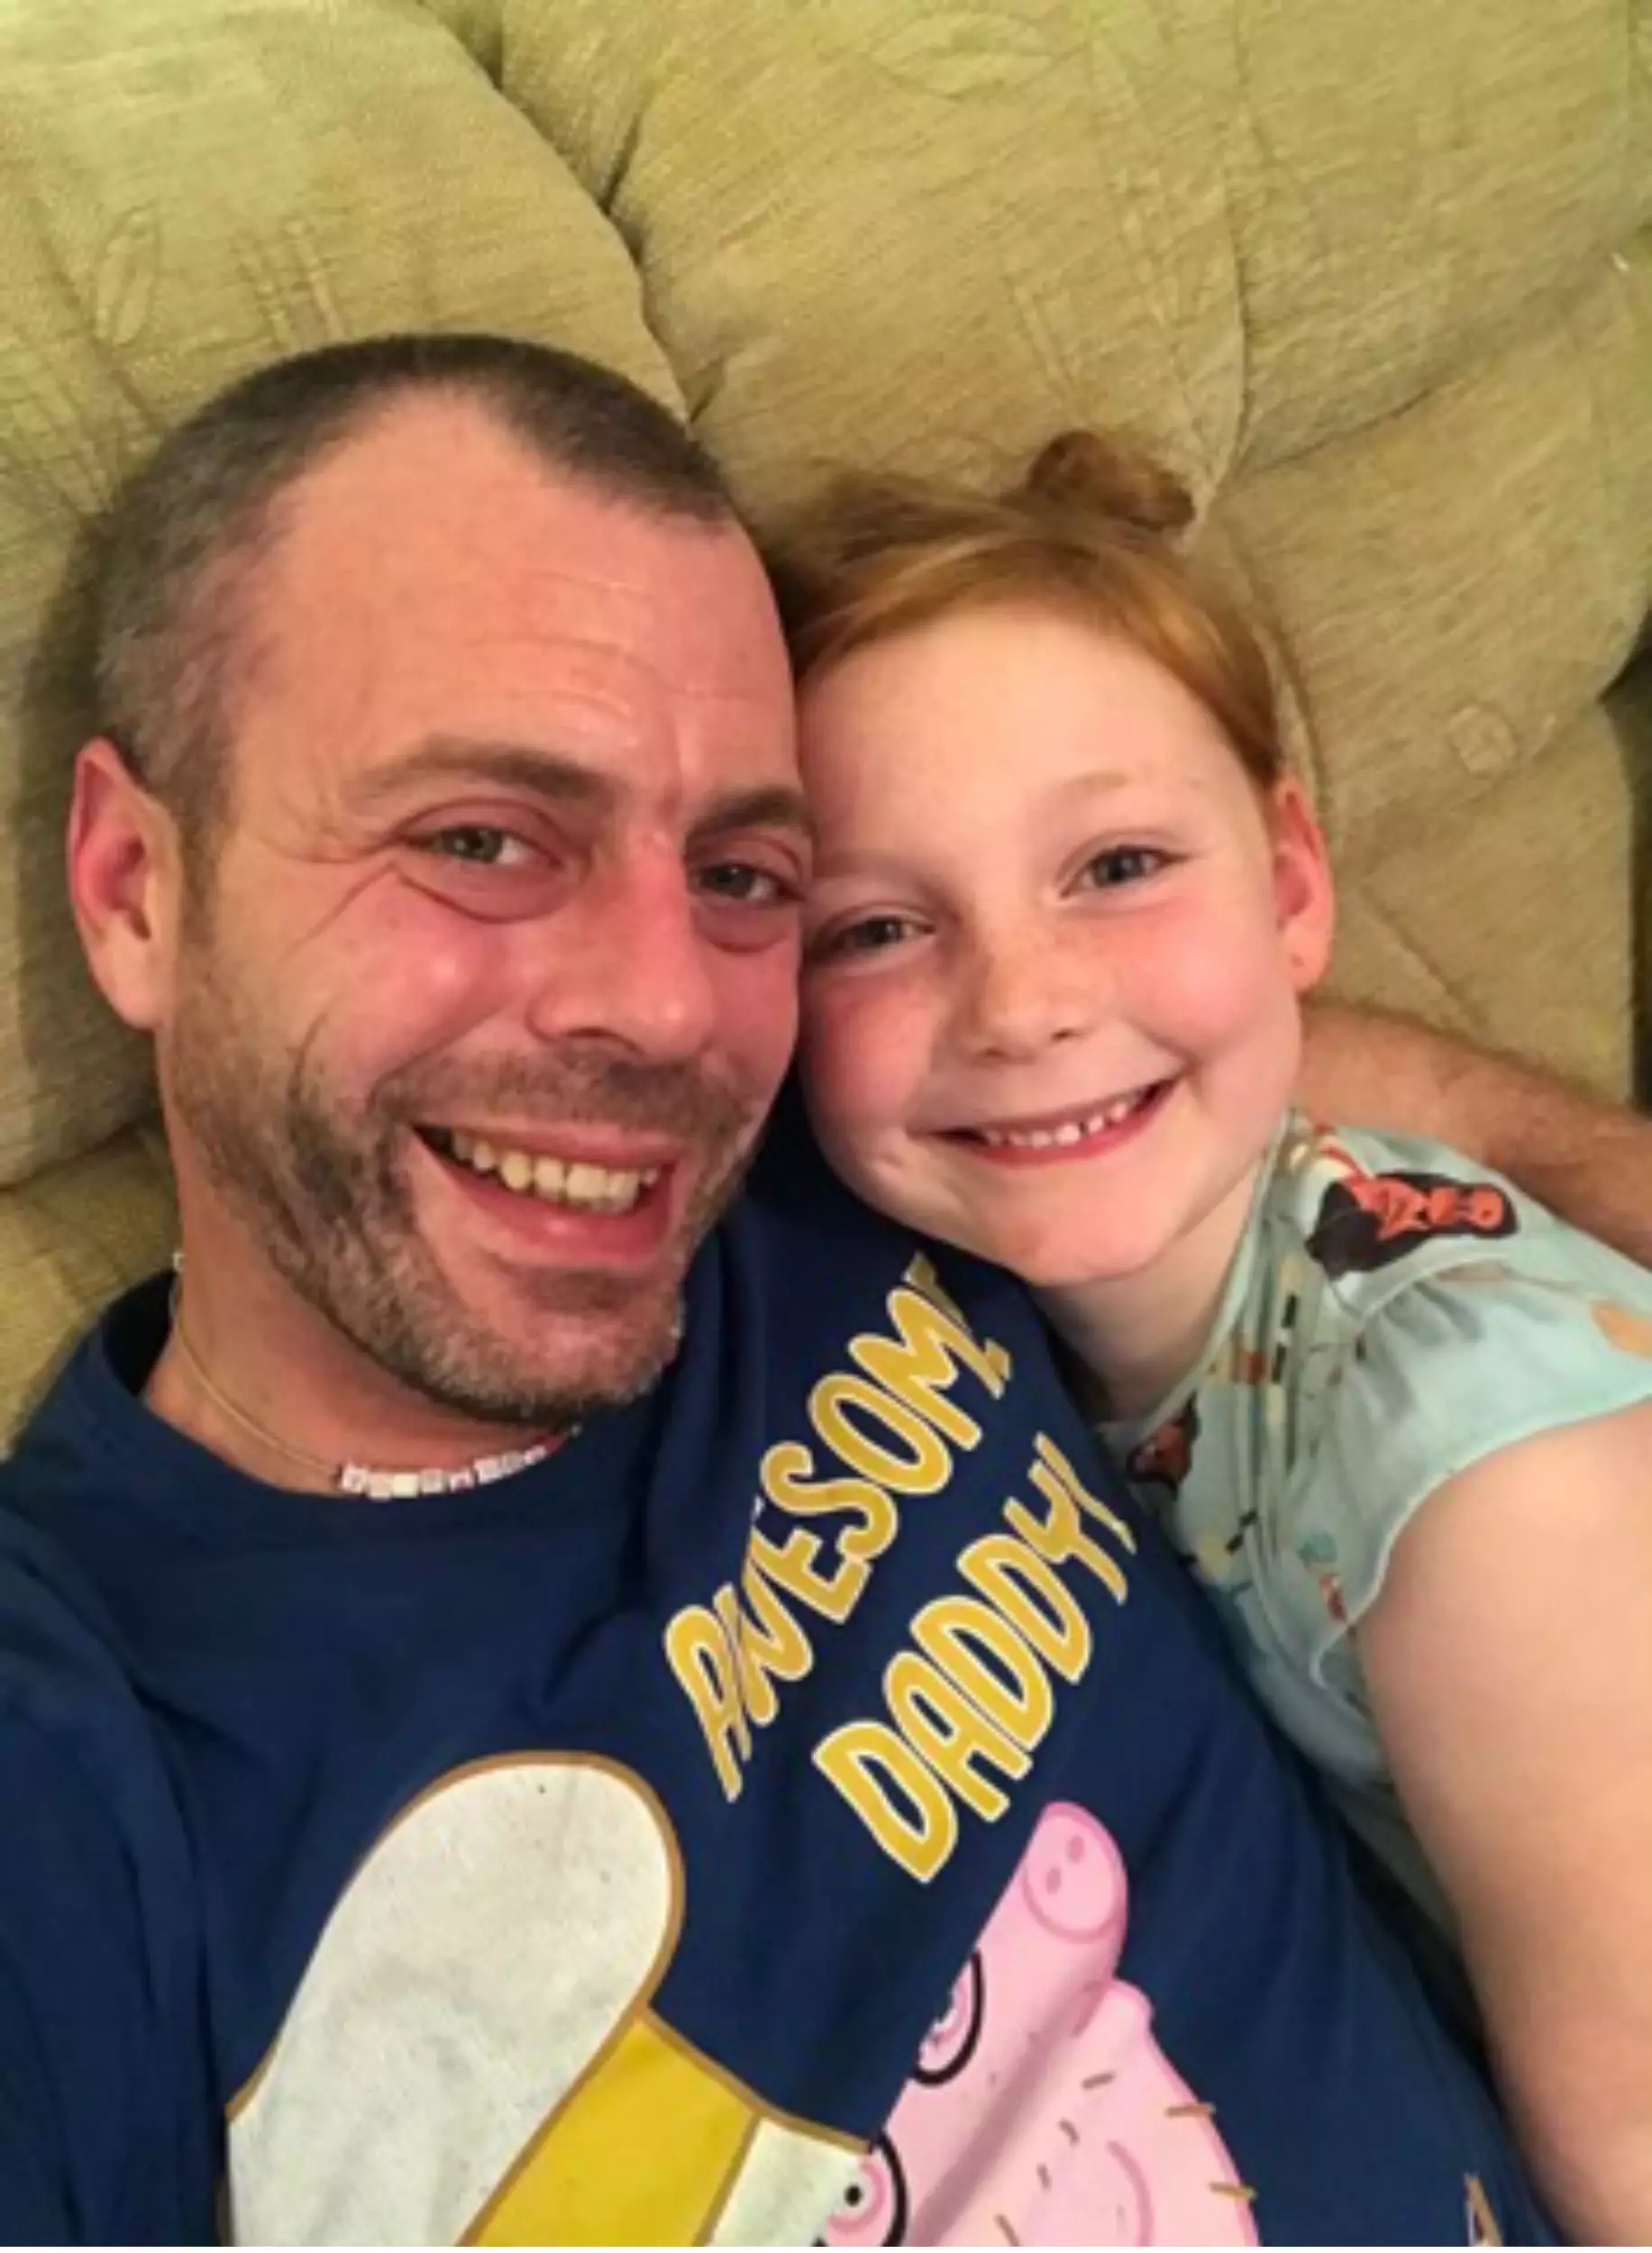 Andy with his daughter Chloe.